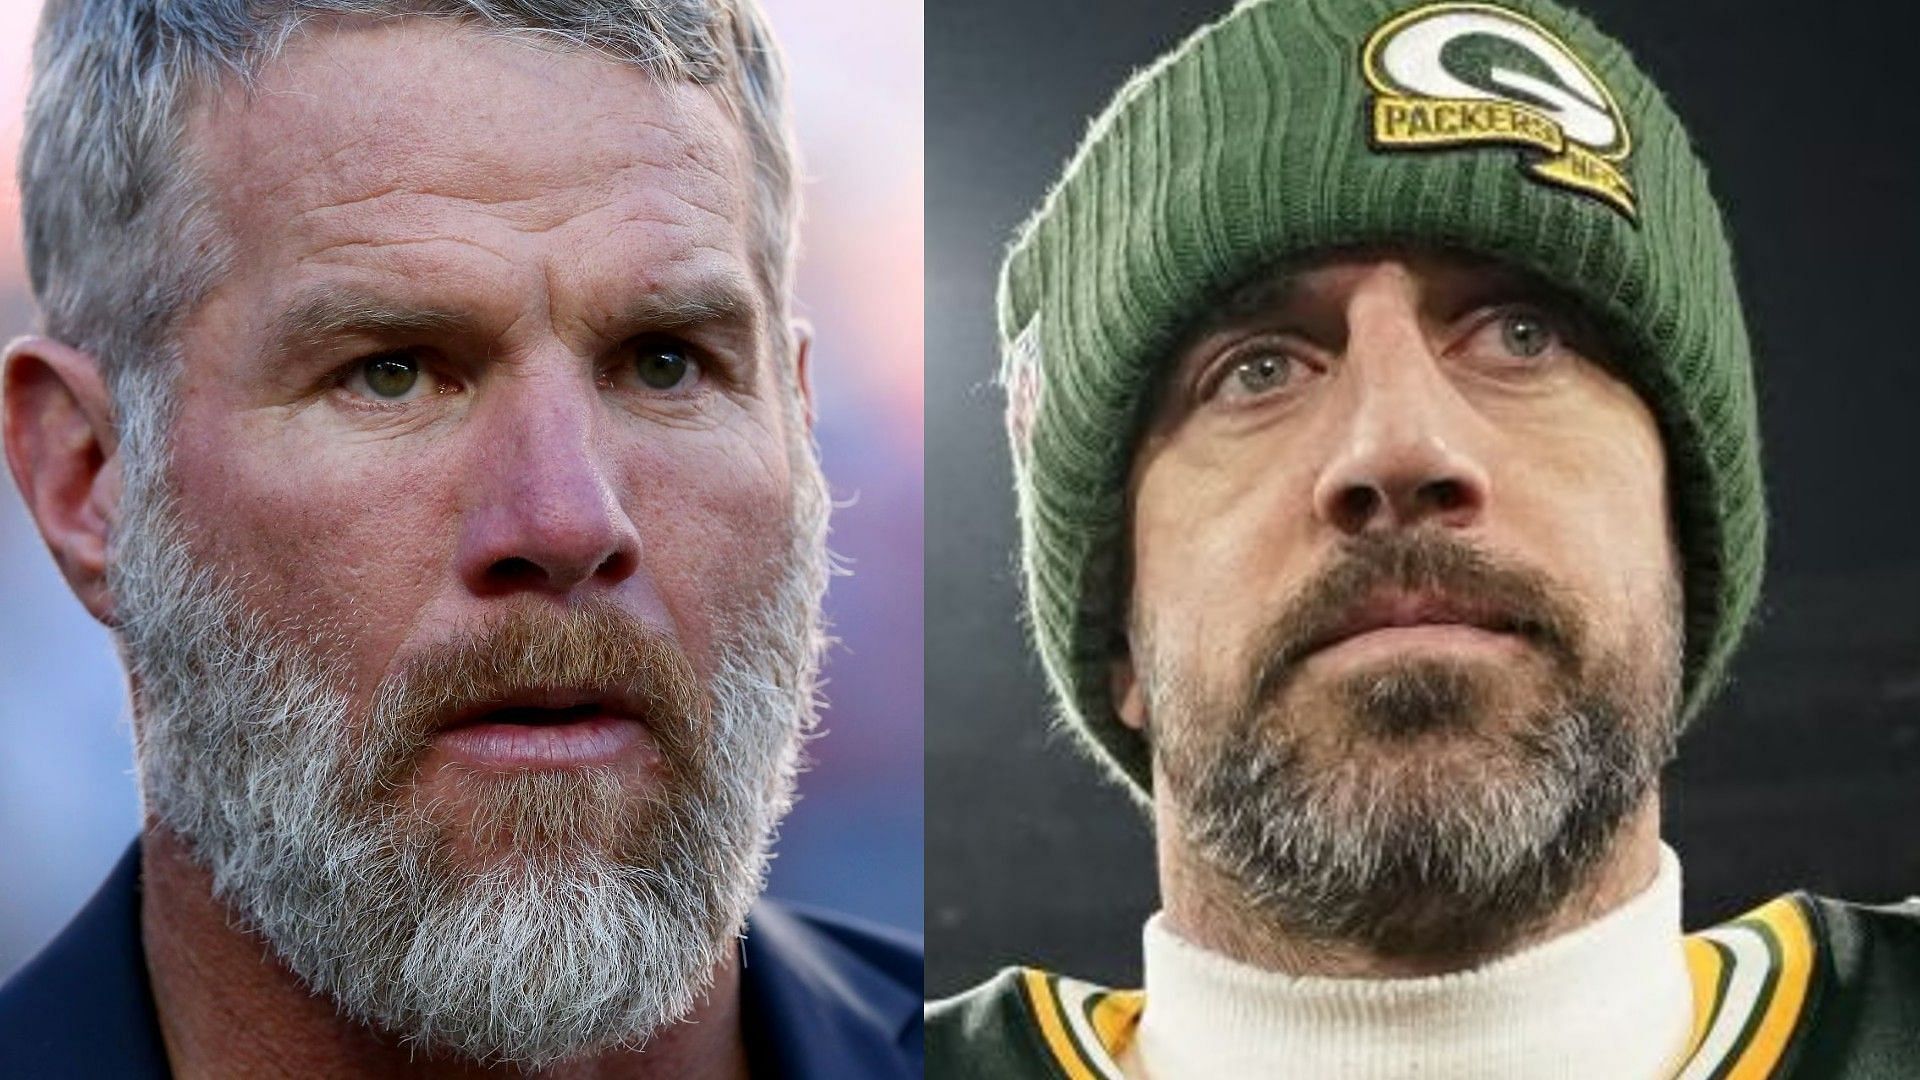 Aaron Rodgers wins comparison to Brett Favre, claims NFL analyst